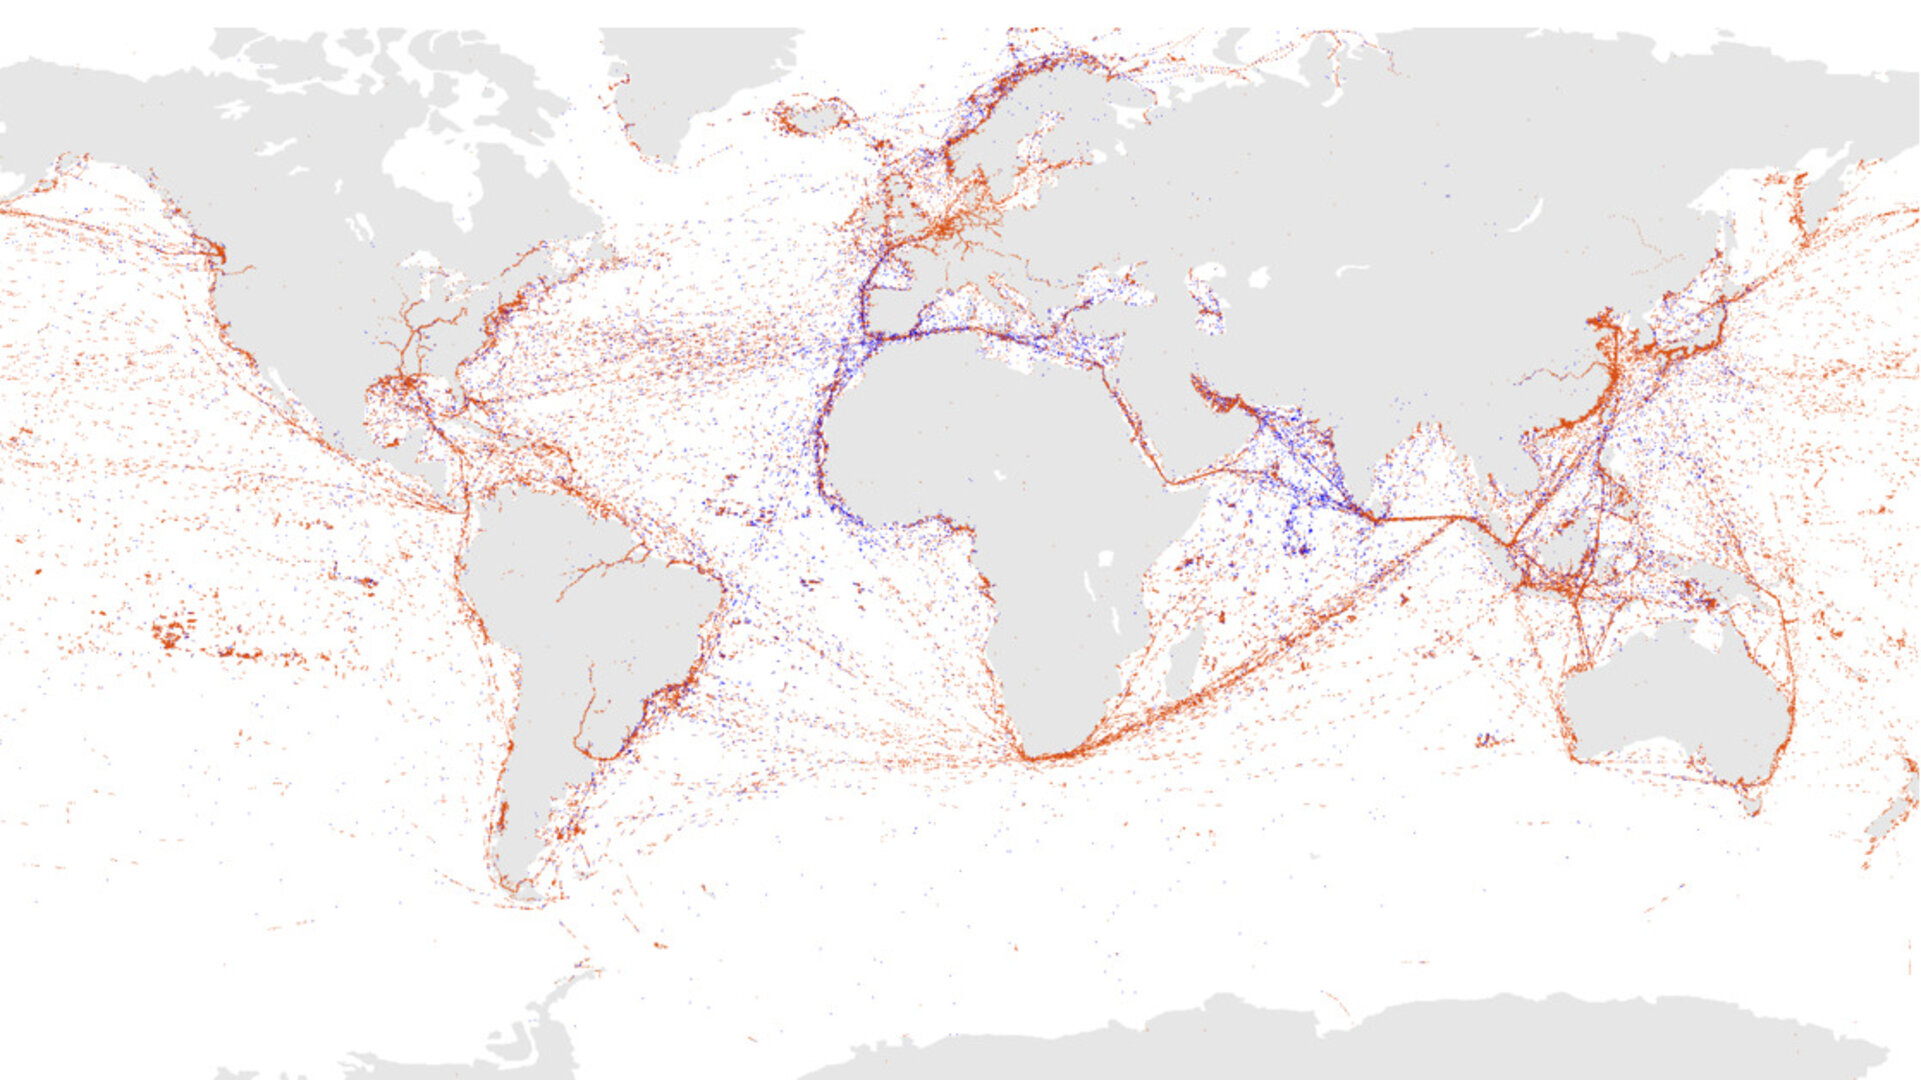 Map of the 2 million messages from 70 000 ships at sea